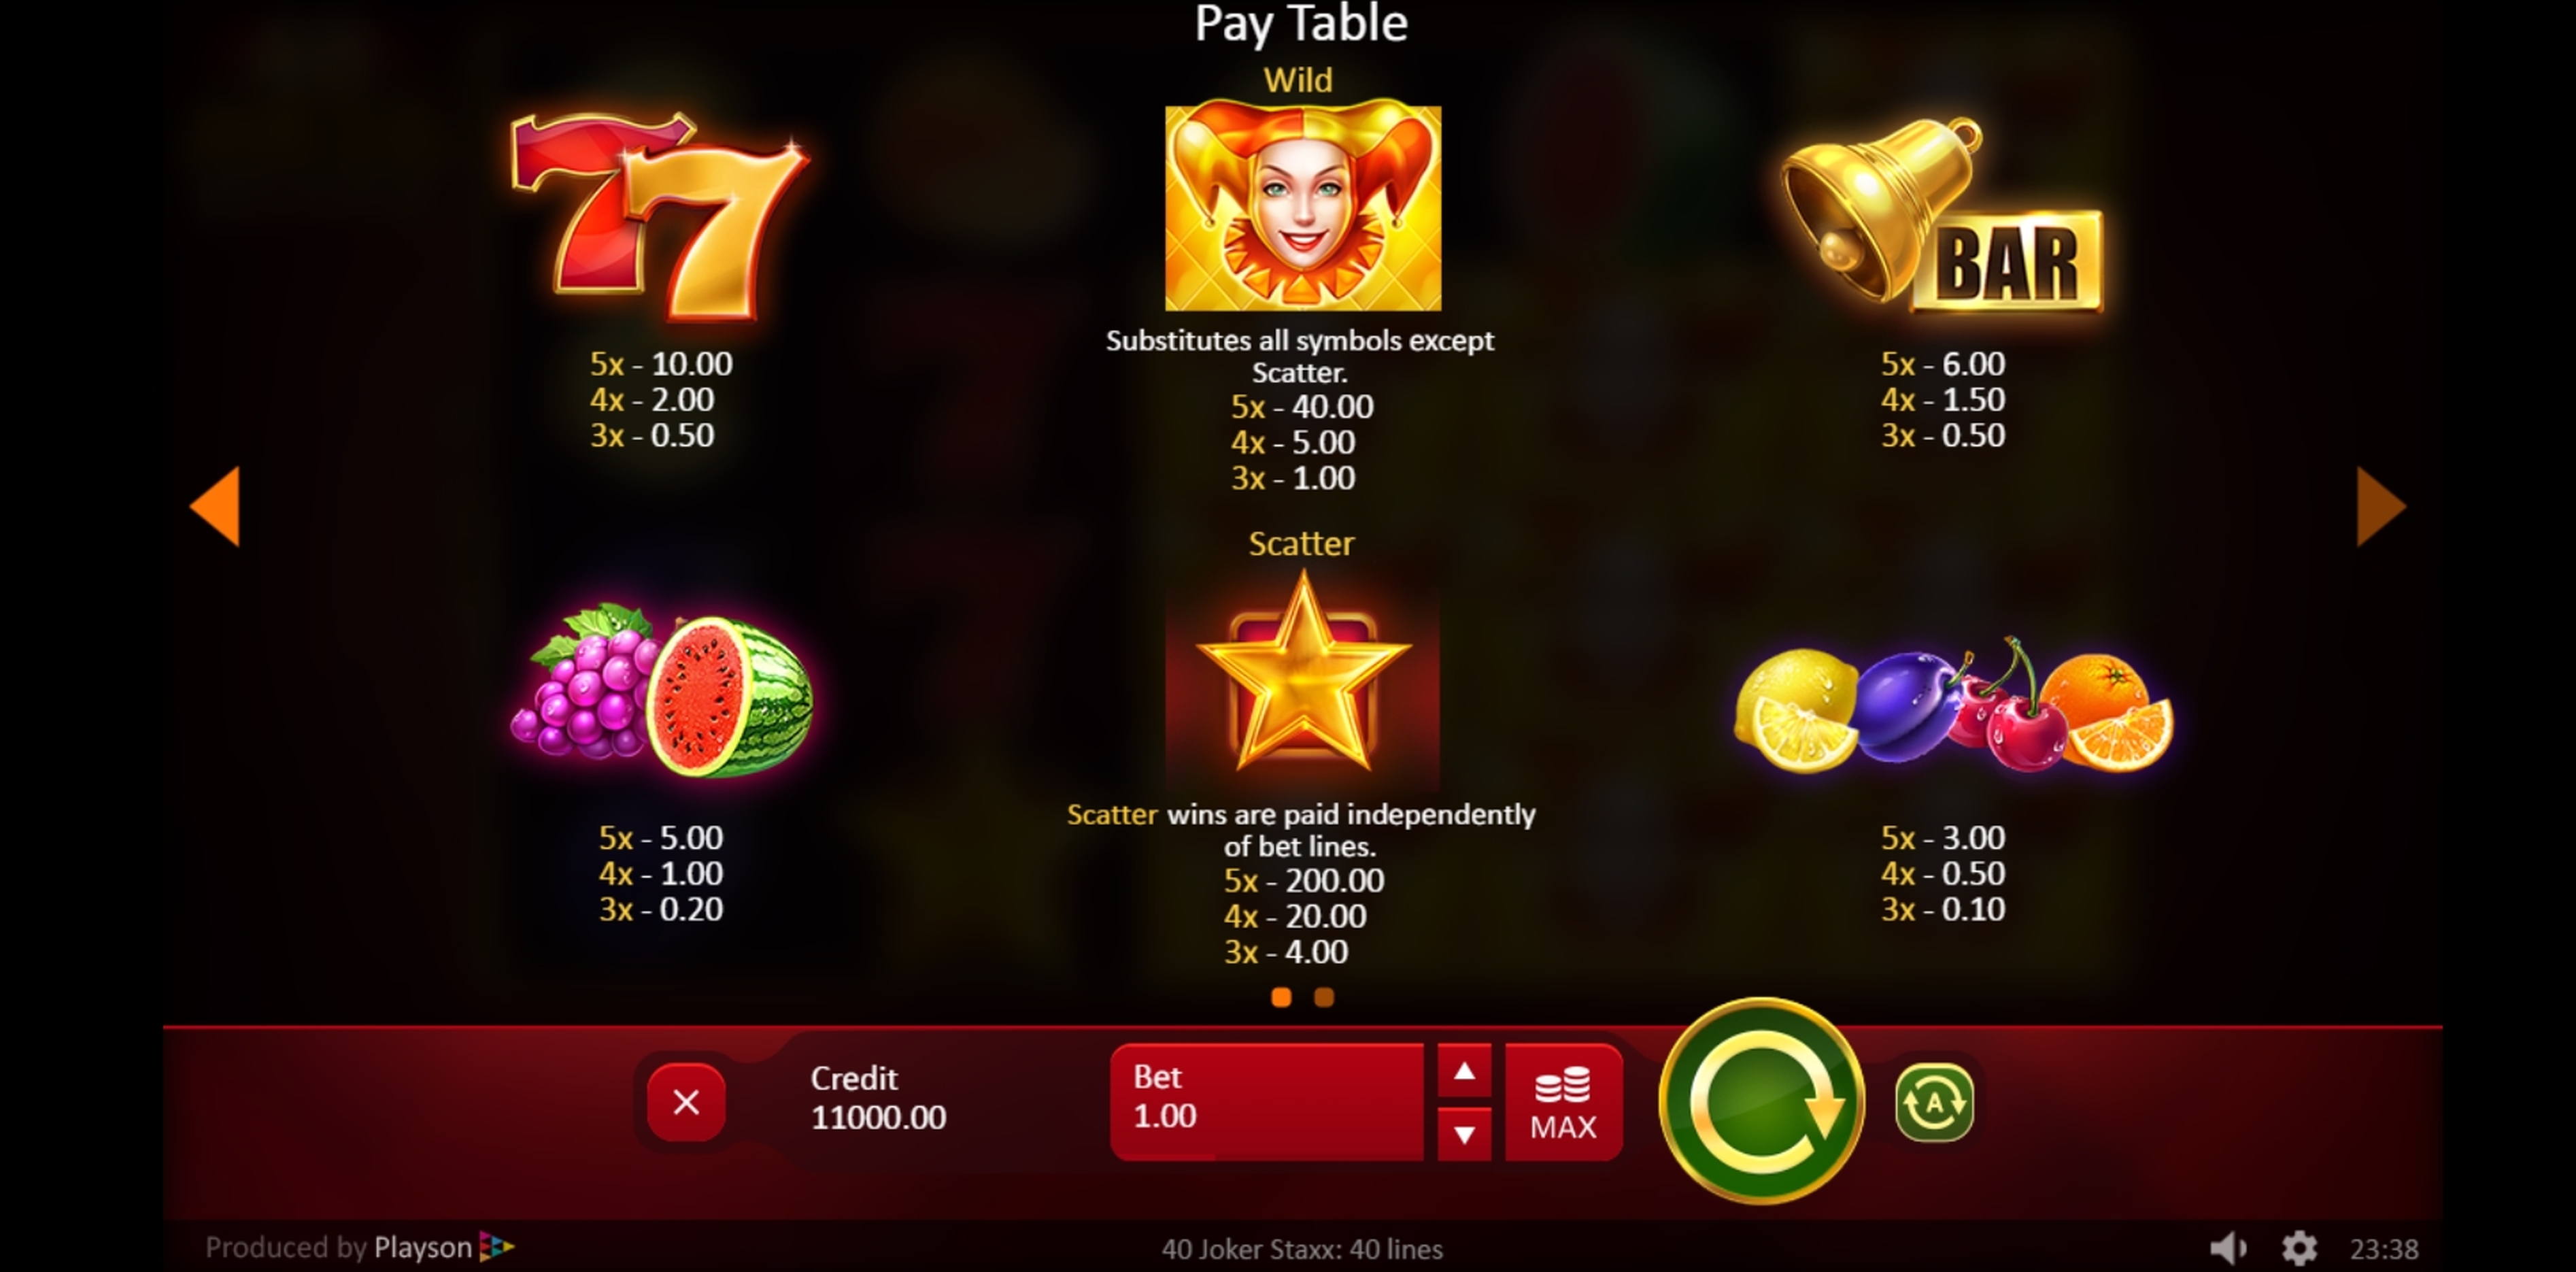 Info of 40 Joker Staxx: 40 lines Slot Game by Playson